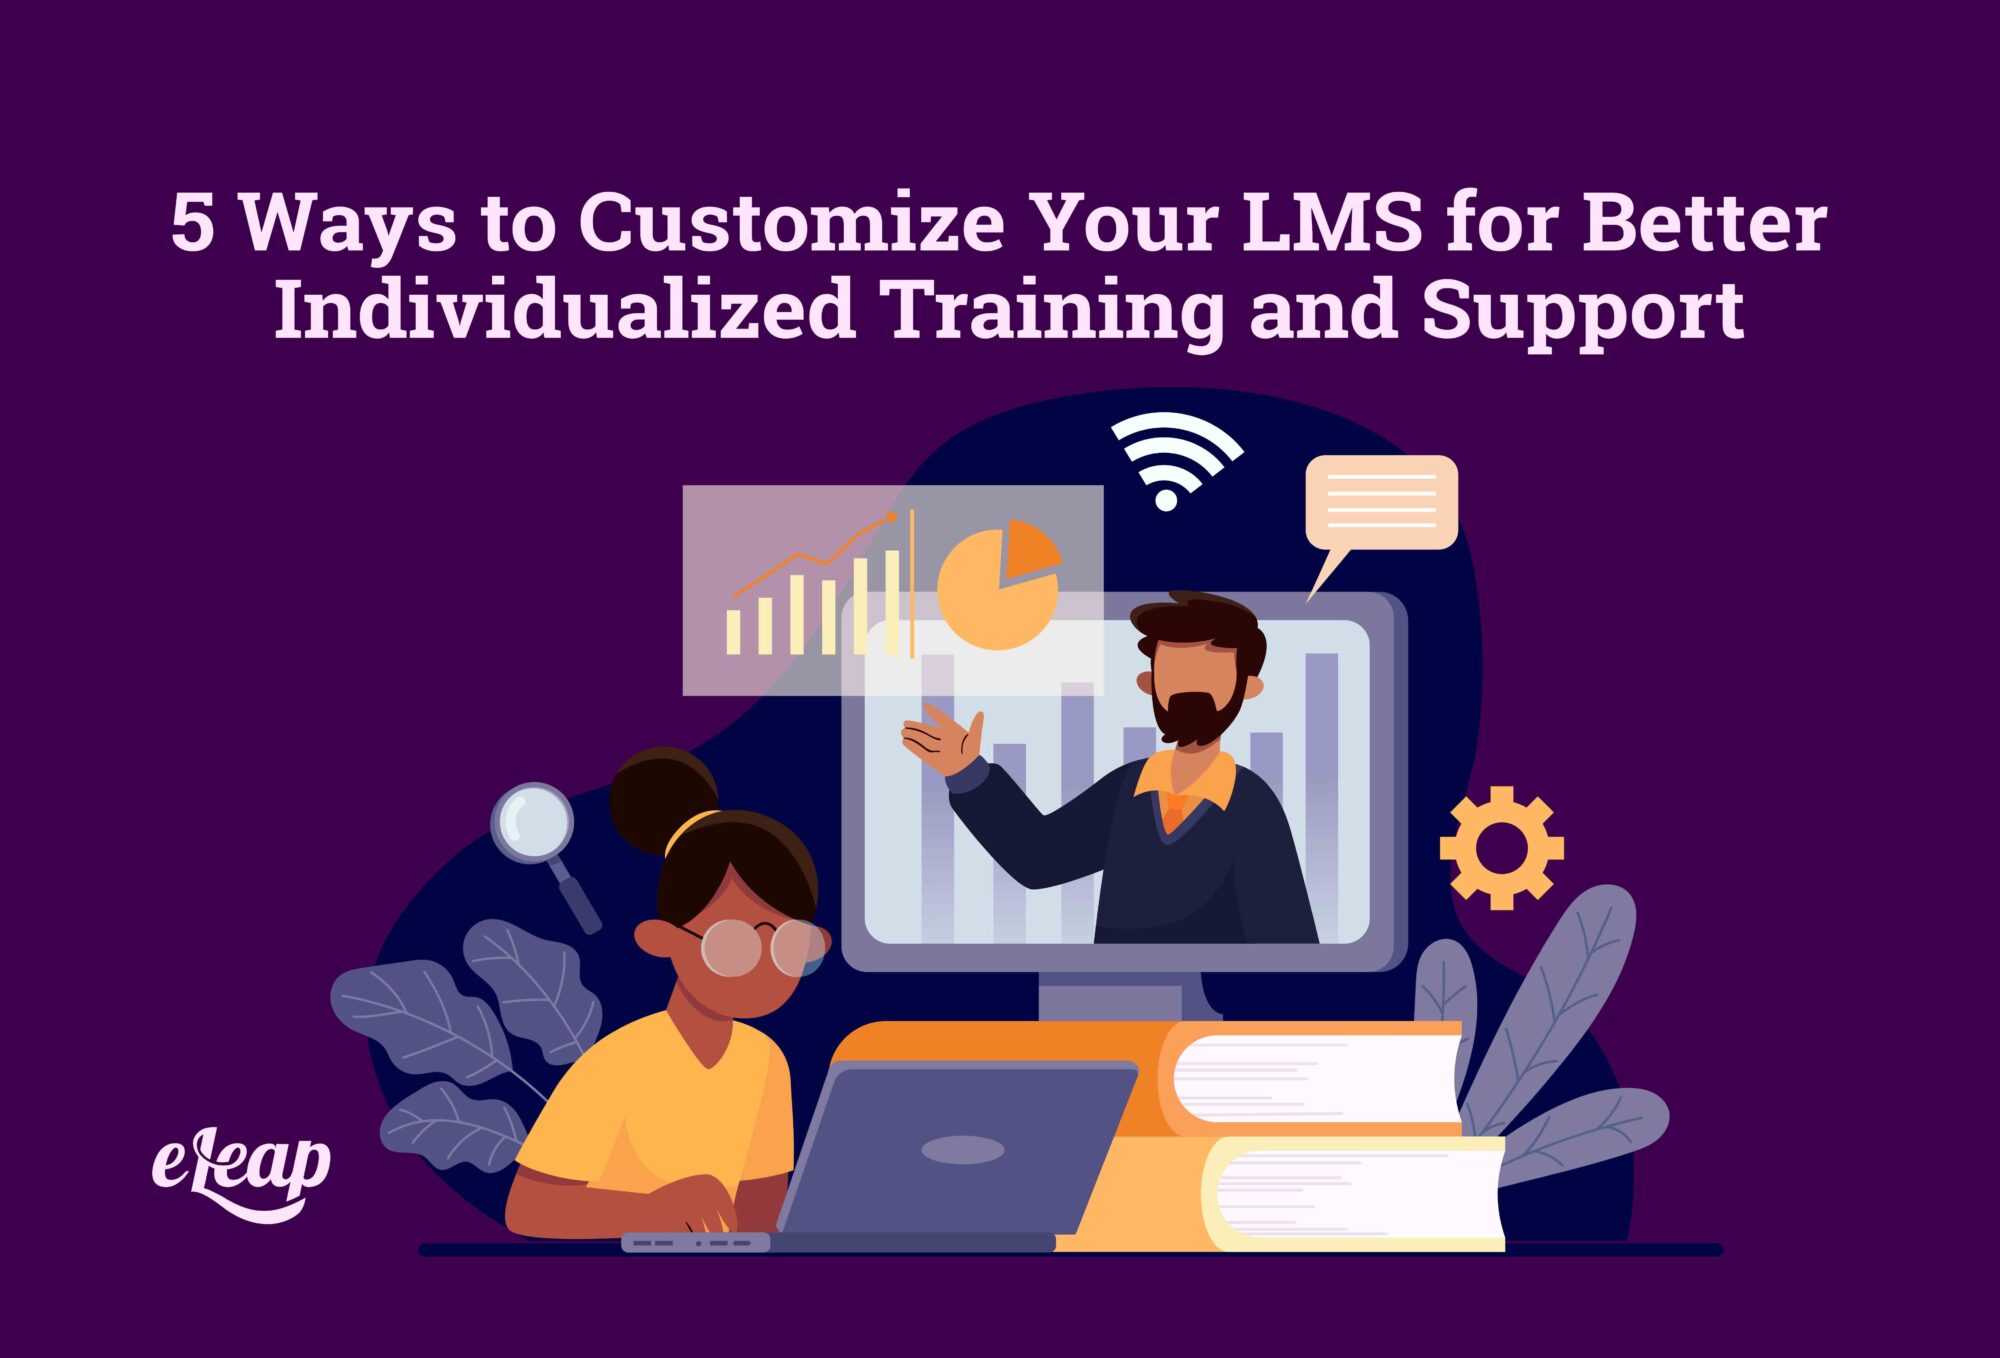 5 Ways to Customize Your LMS for Better Individualized Training and Support